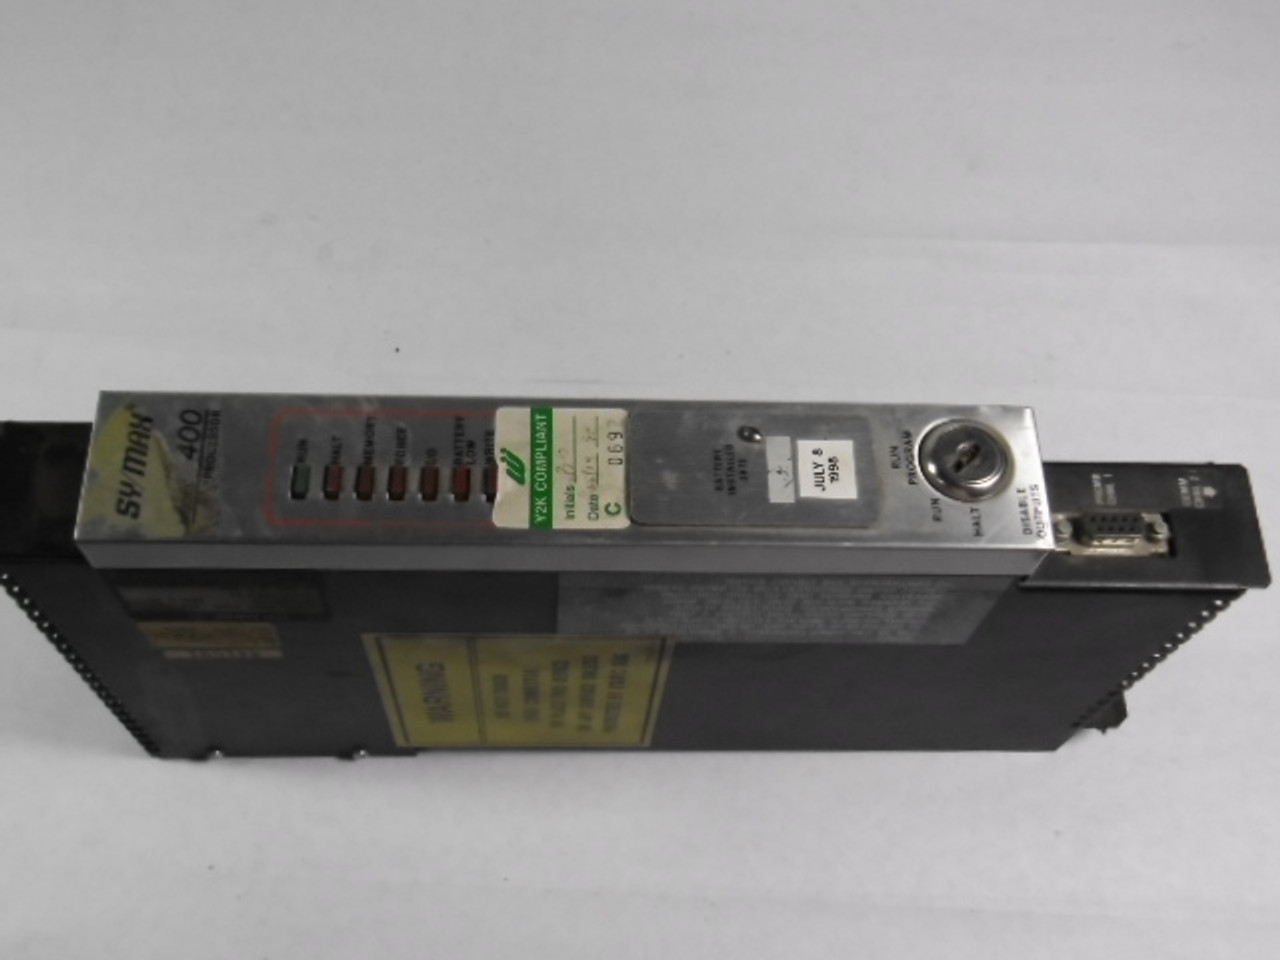 Square D 8020-SCP-423 Sy/Max Module 5VDC 3.5A *No Key* *COSMETIC DAMAGE* USED